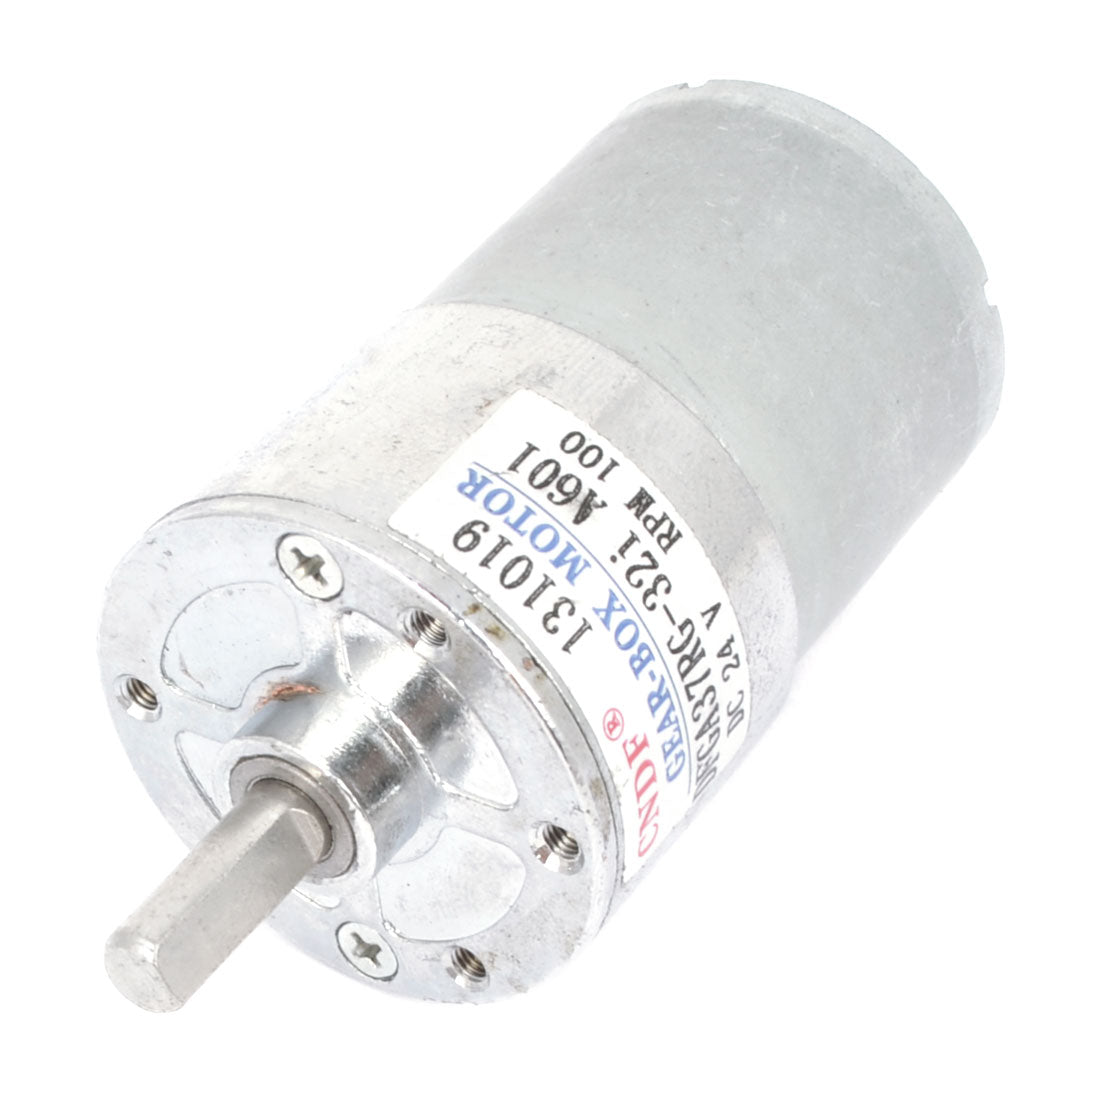 uxcell Uxcell Silver Tone Metal DC 24V 100RPM Rotation Output Speed Motor